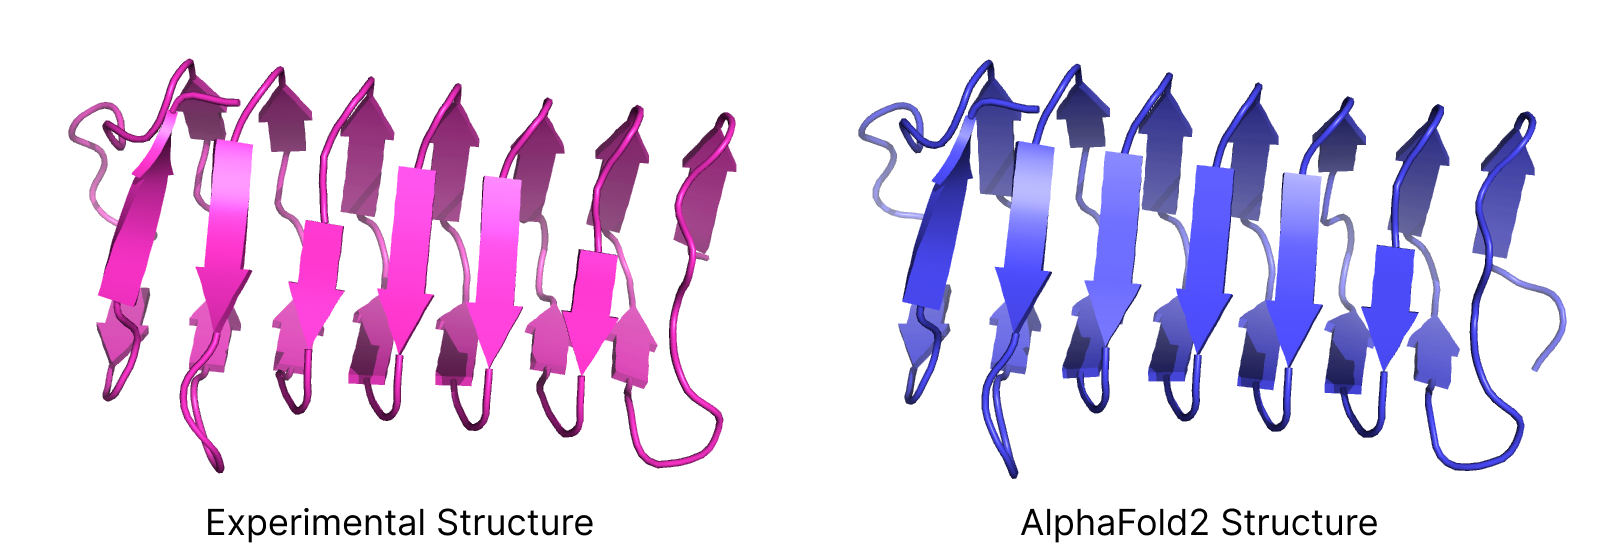 Comparison between the Experimental and AlphaFold2 predicted structure of an Antifreeze Protein from Choristoneura Fumiferana (Spruce Budworm).